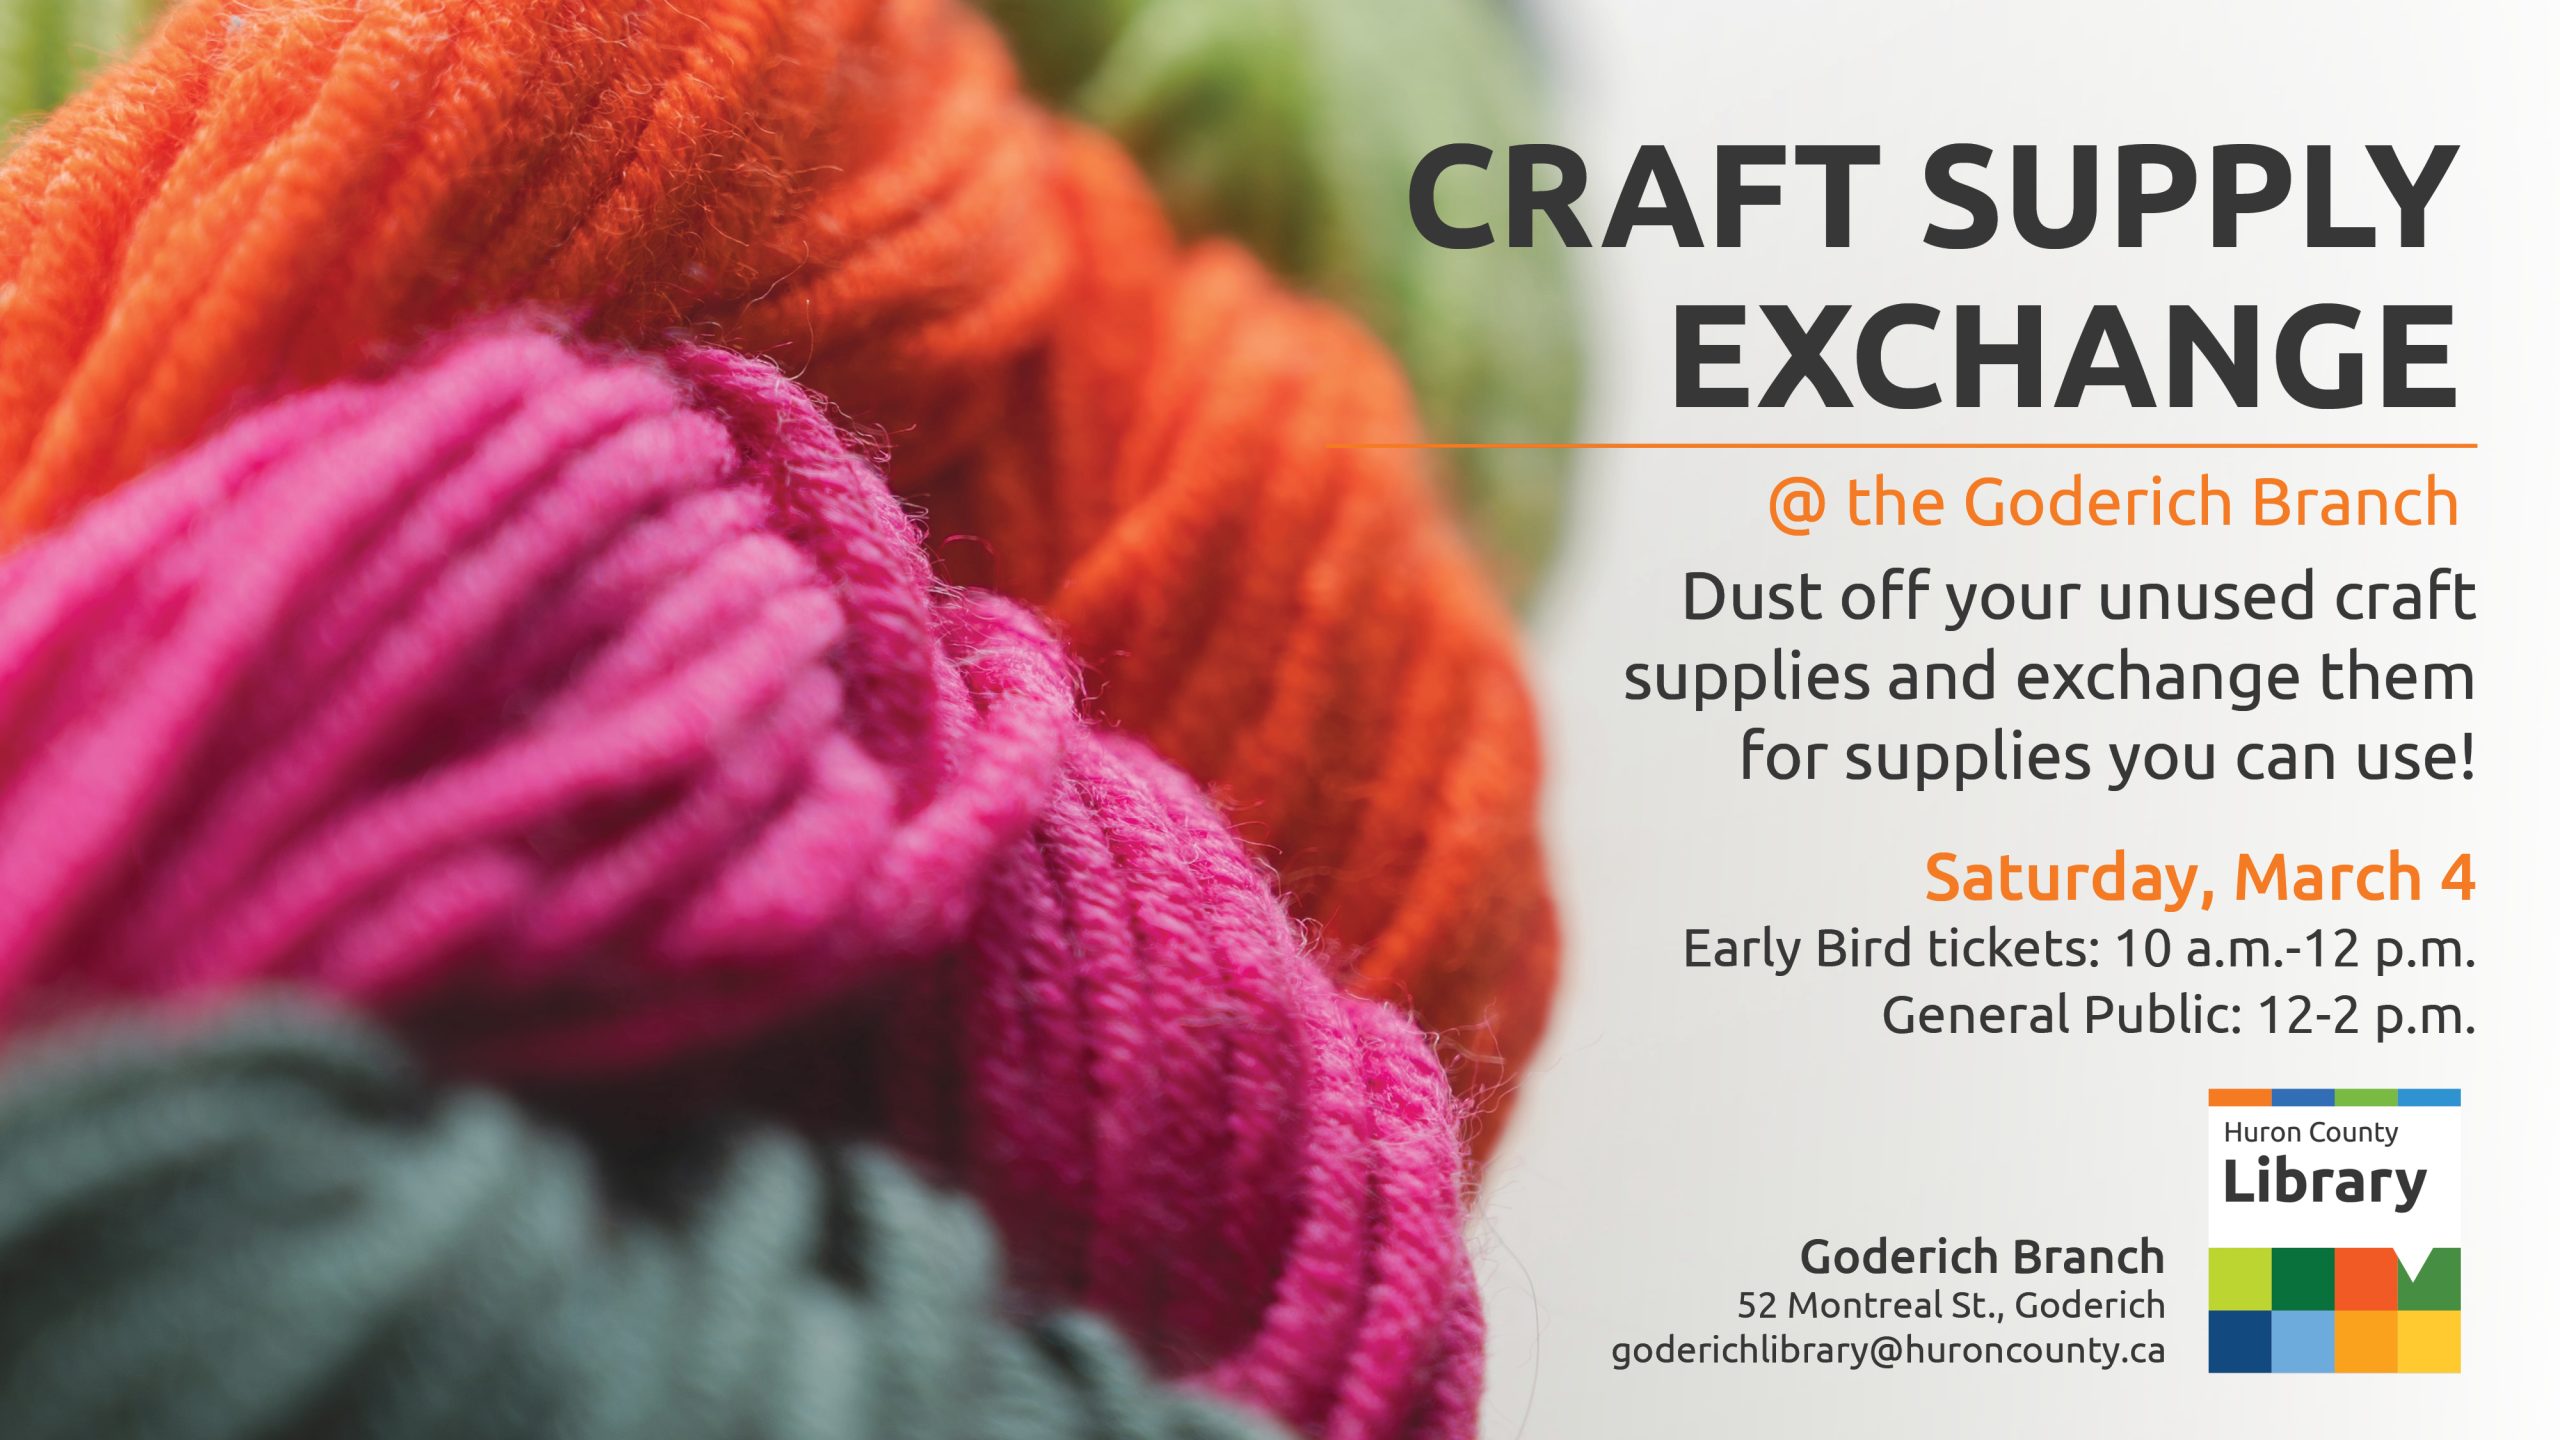 Photo of green, pink and orange balls of yarn with text promoting craft supply exchange at Goderich Branch